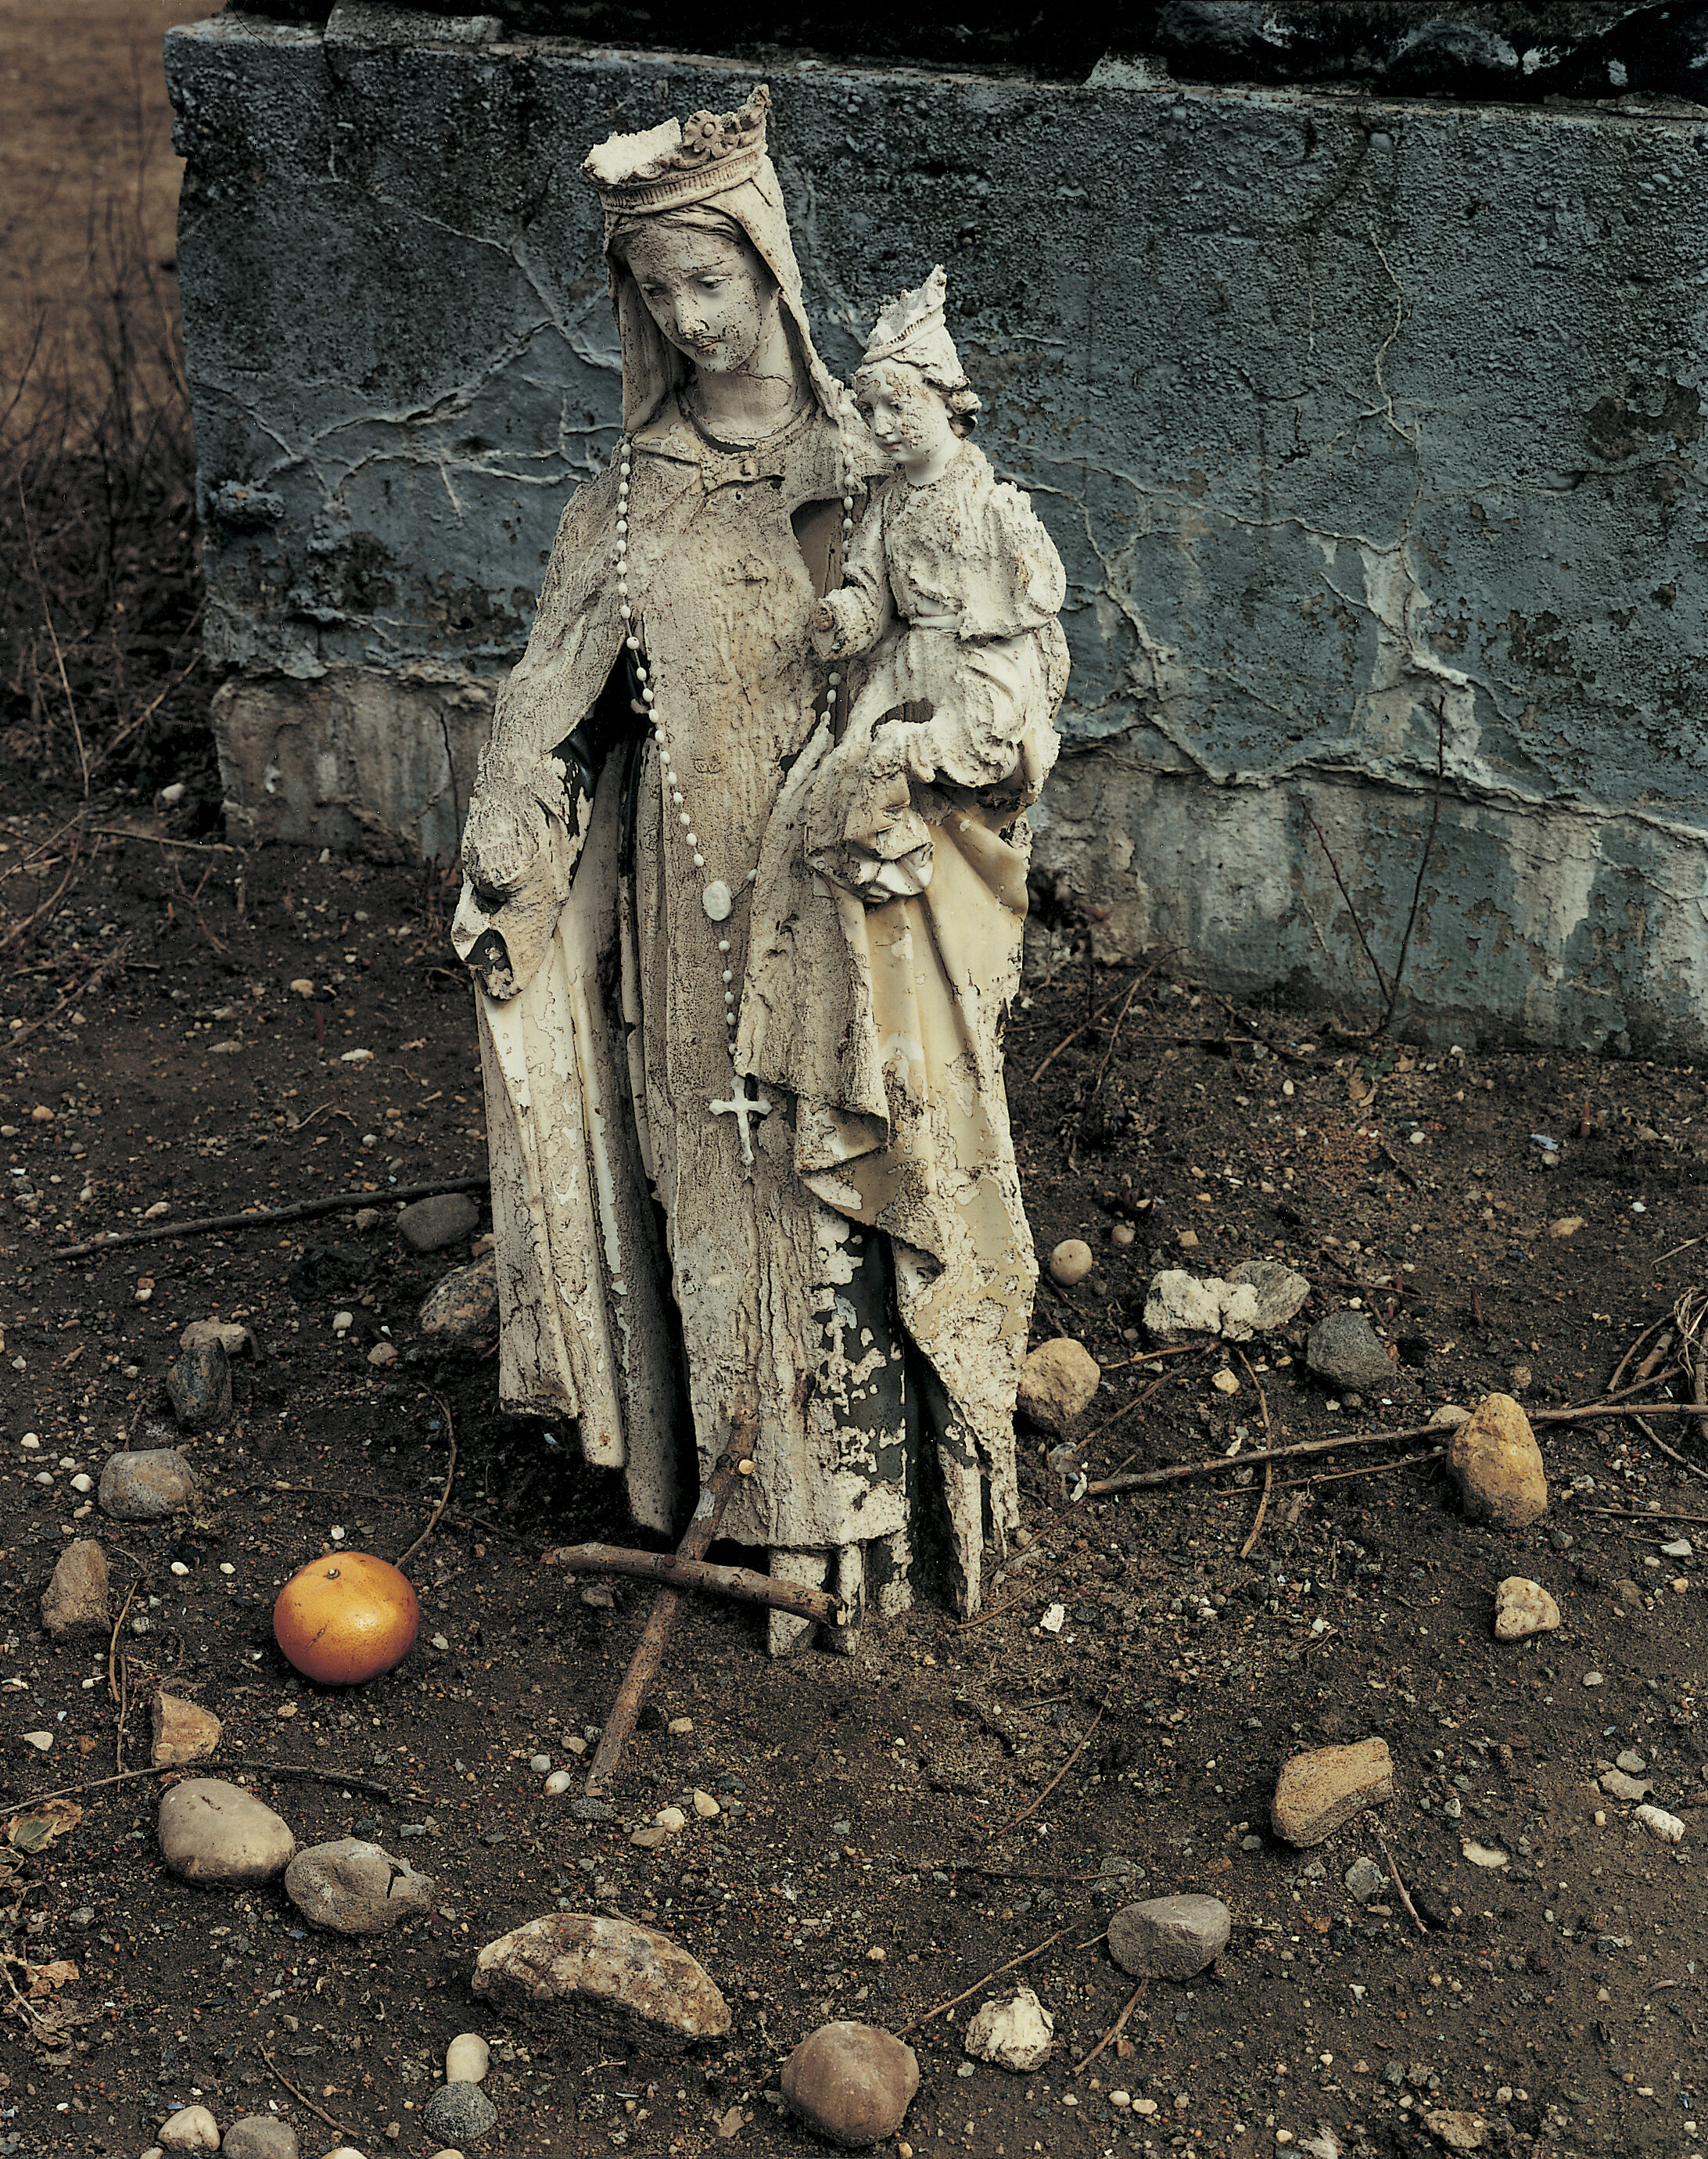 A statue with offerings left by prisoners, December 1991